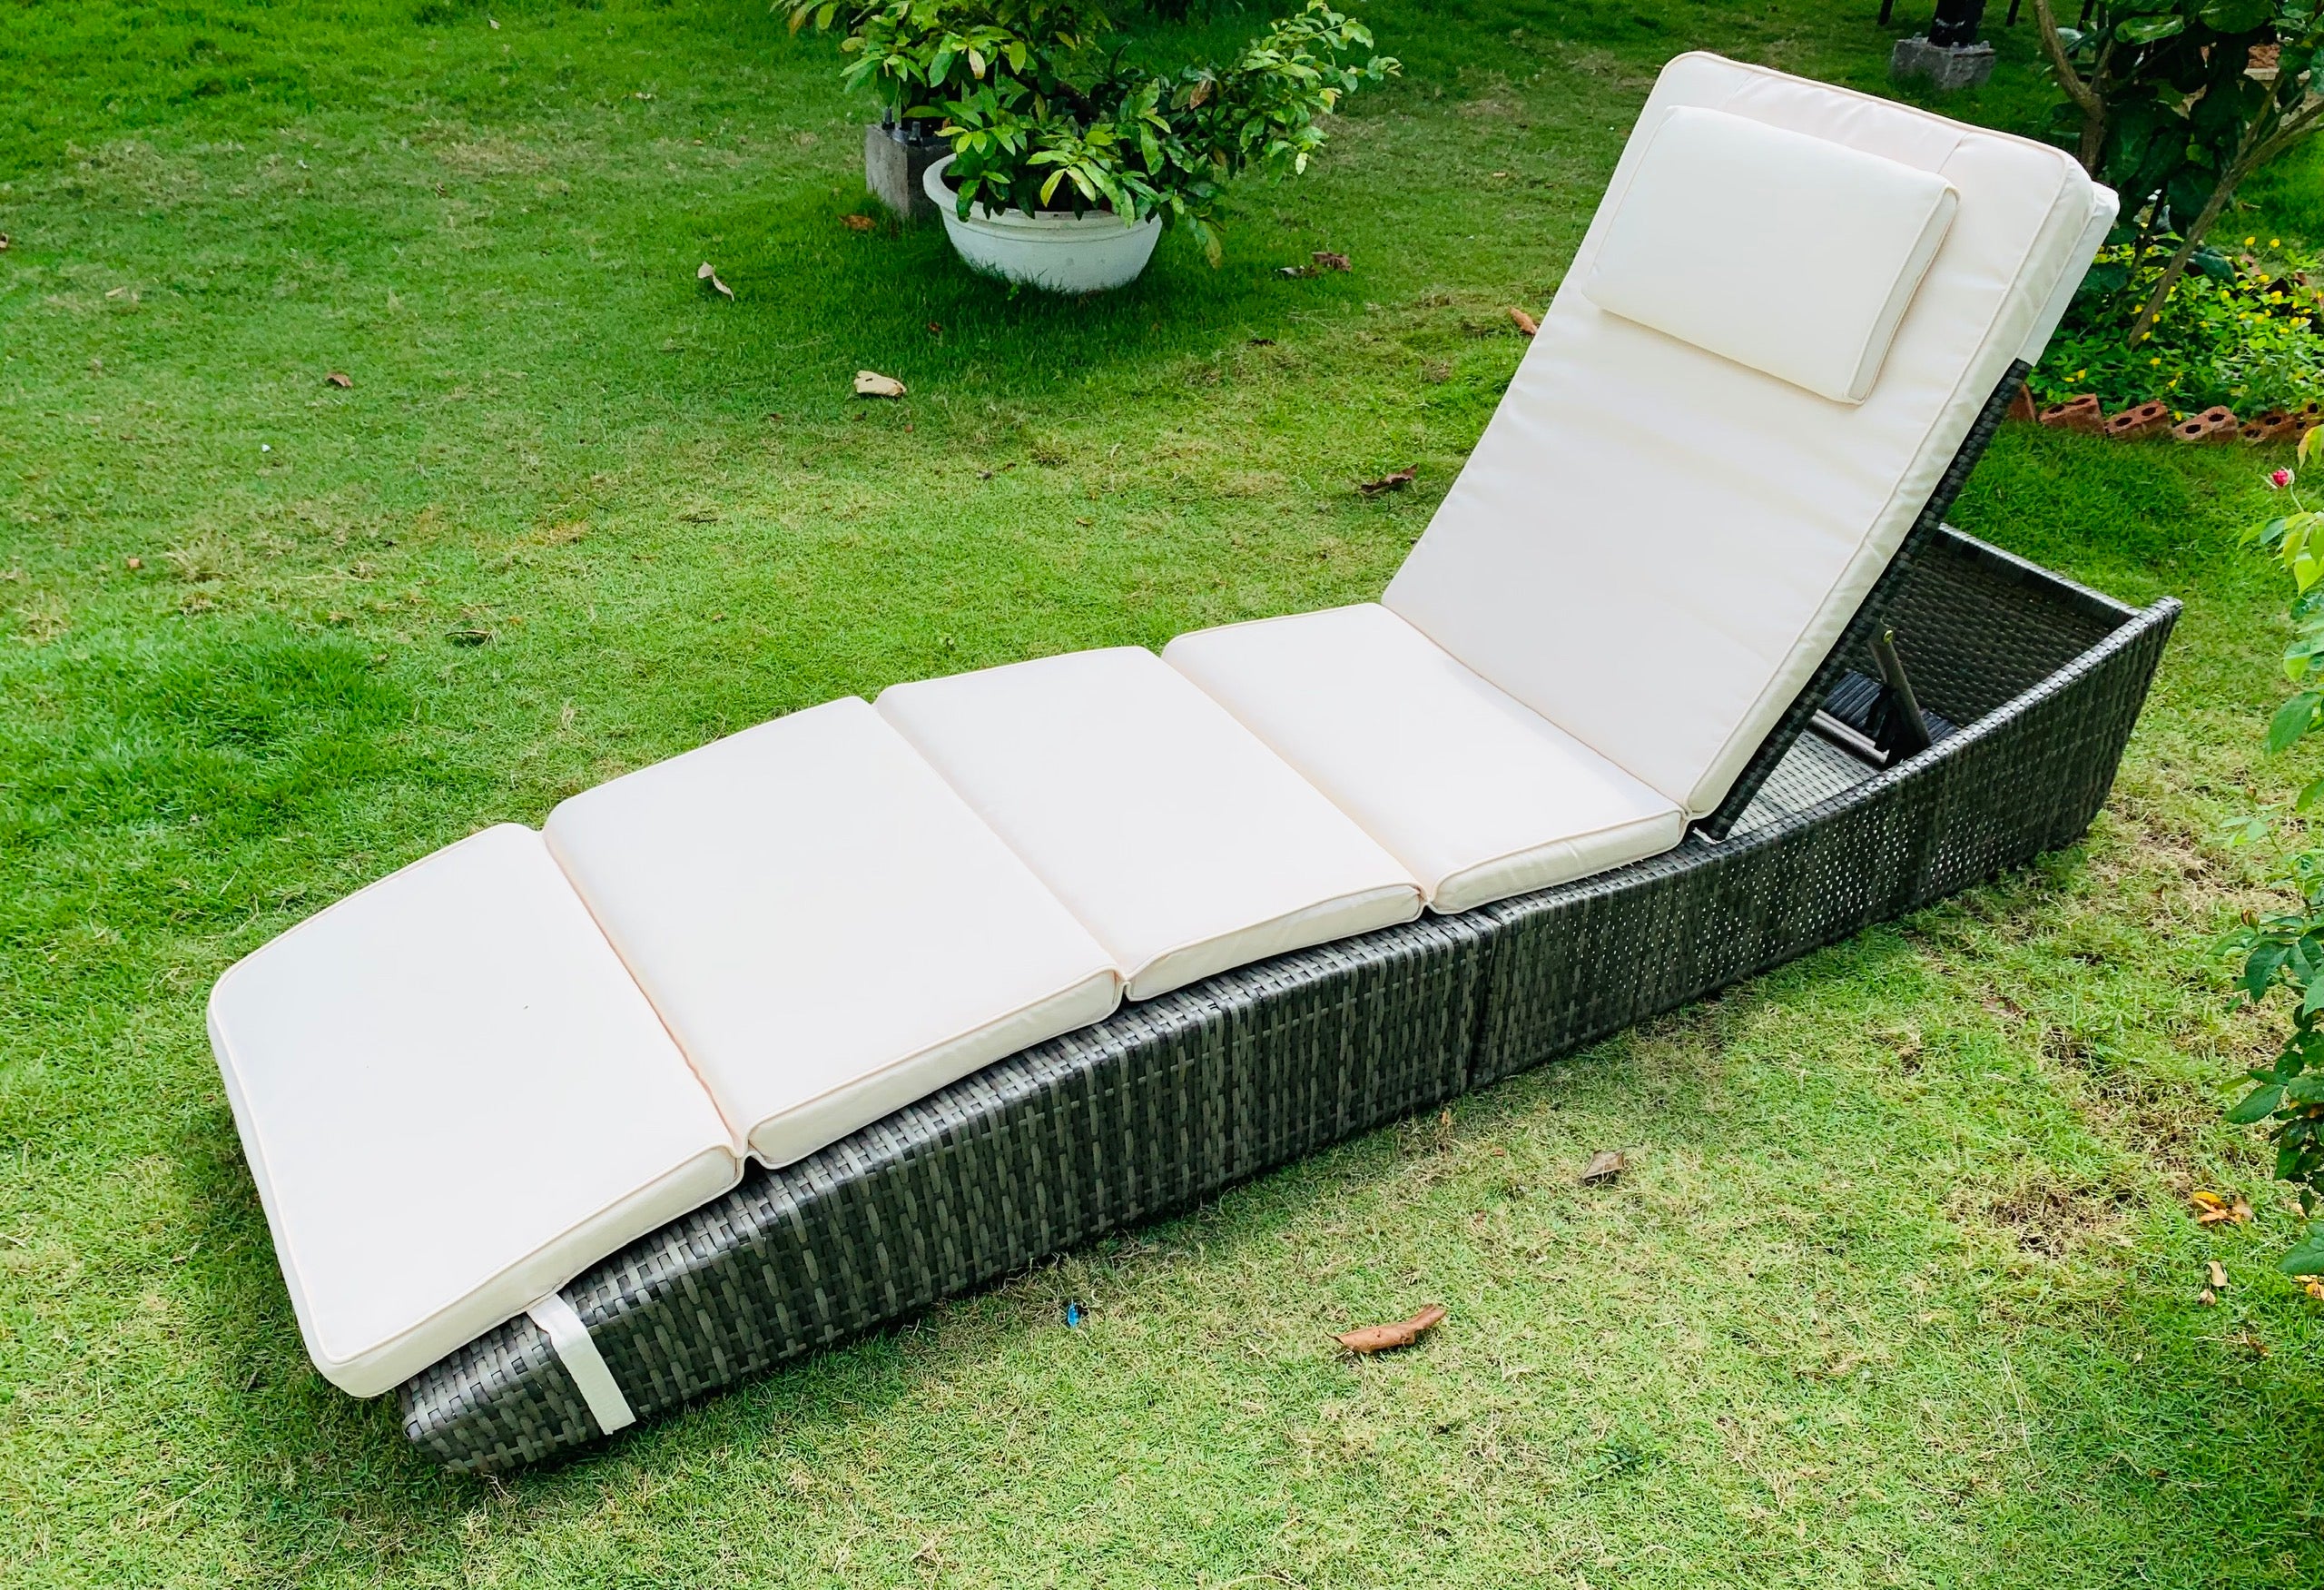 Outdoor Foldable Chaise Pool Lounge Chair Folding Wicker Rattan Sun Bed Patio Couch Reclining Lounger Adjustable Padded Backrest Pillow Assembled - image 2 of 5